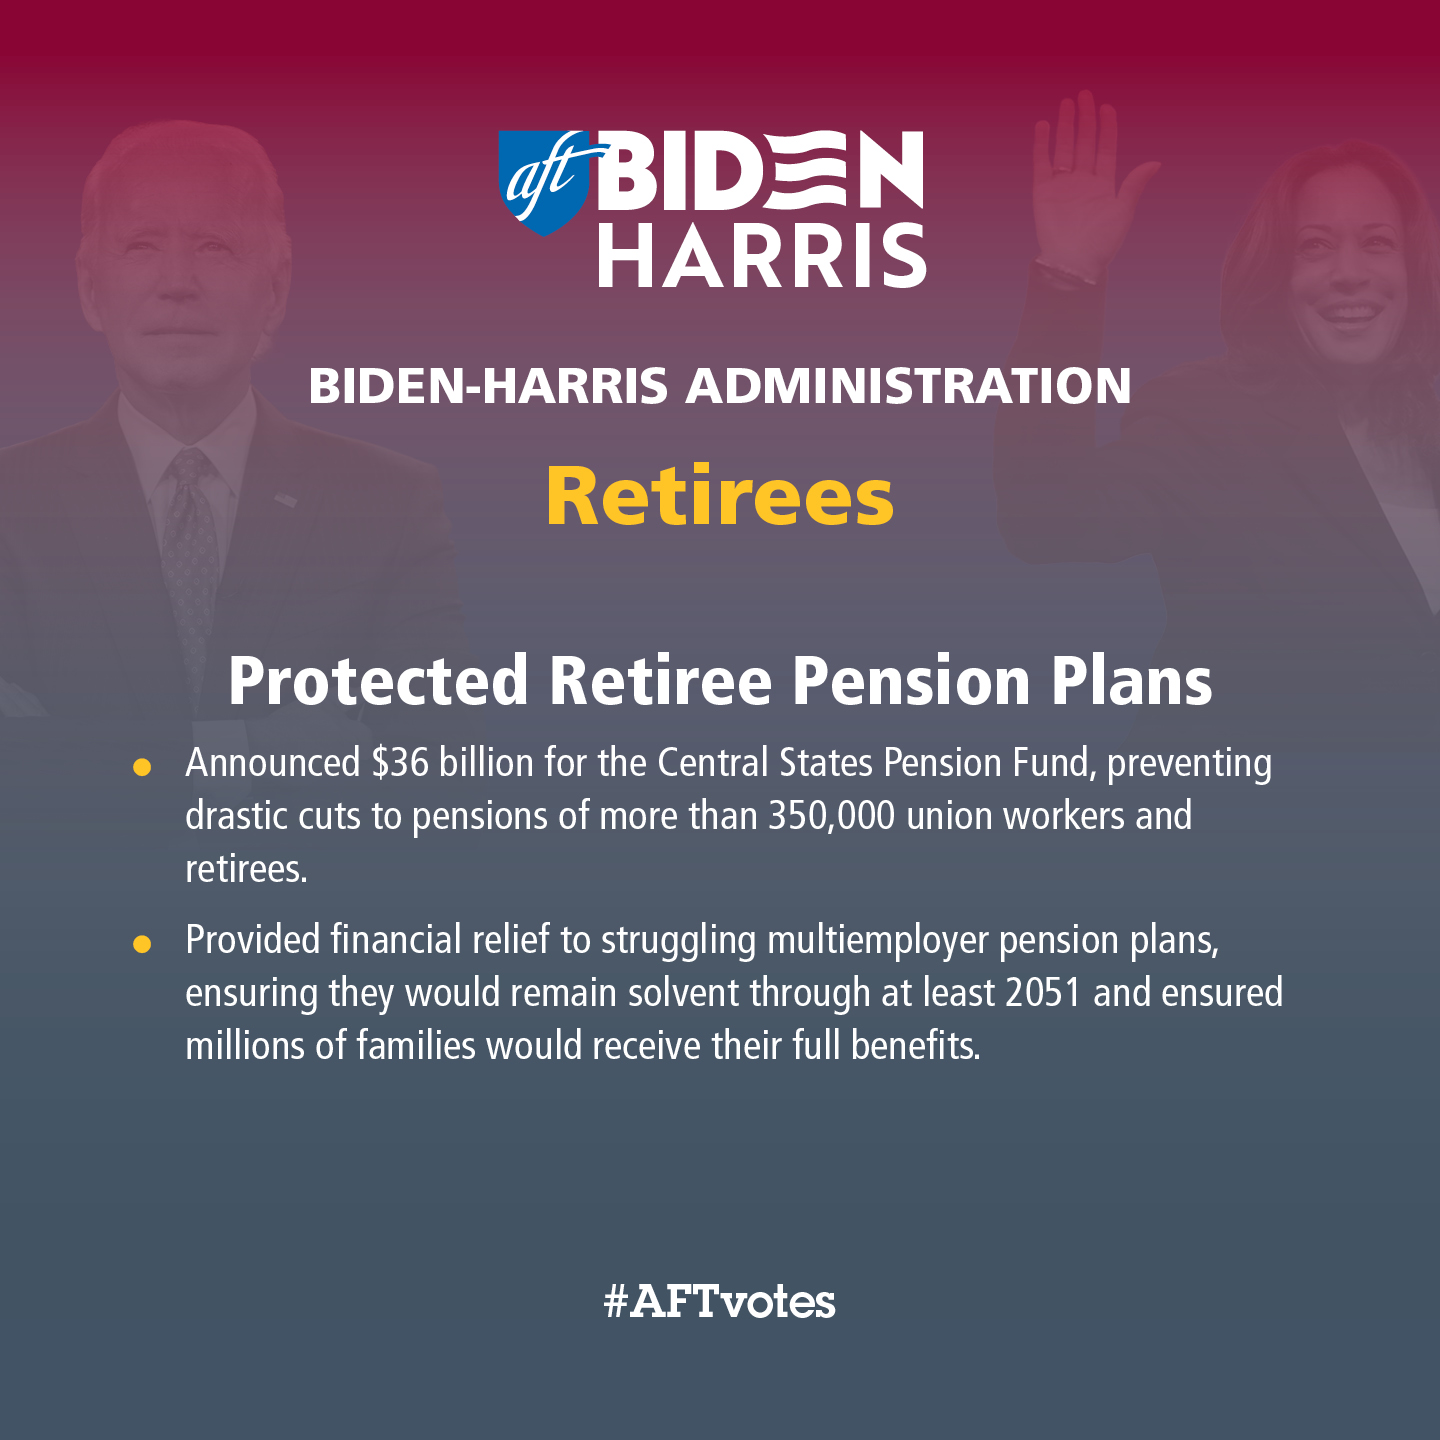 Protected Retiree Pension Plans